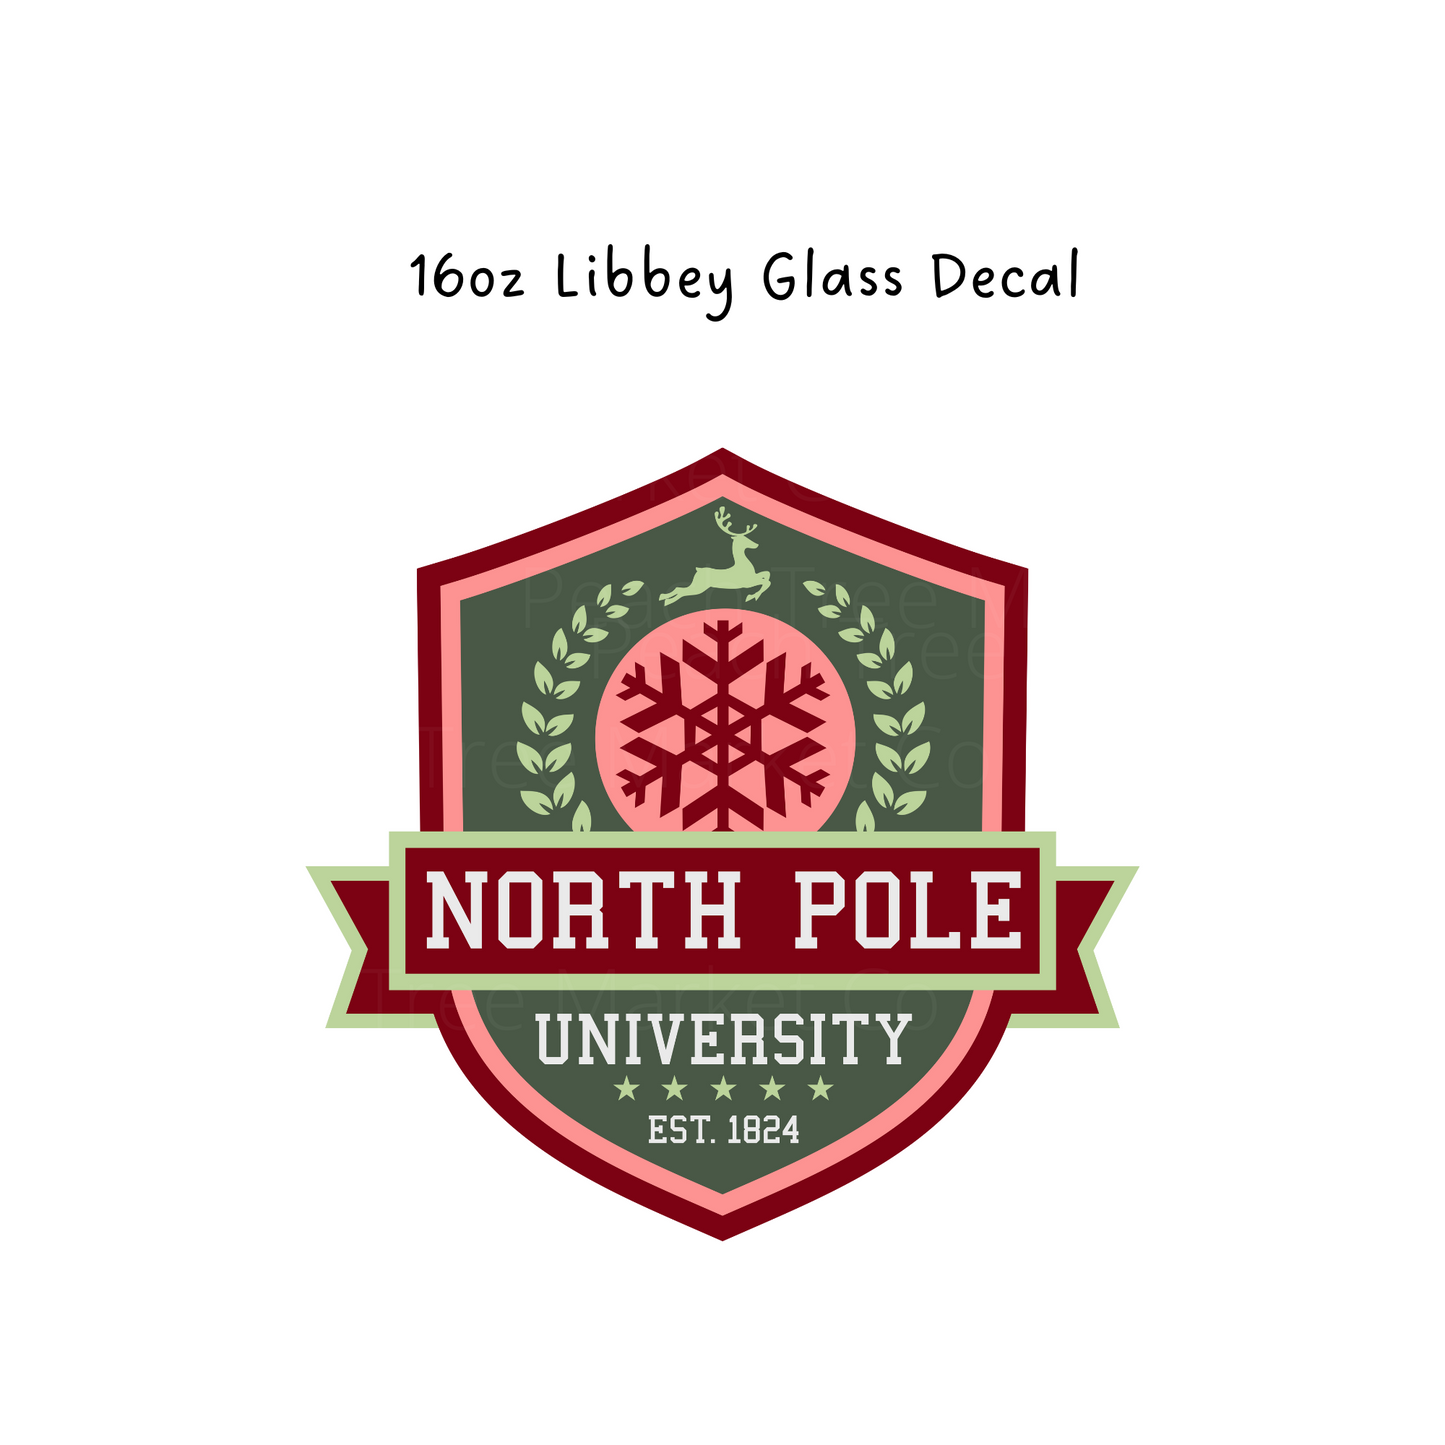 North Pole University  16 Oz Libbey Beer Glass Decal